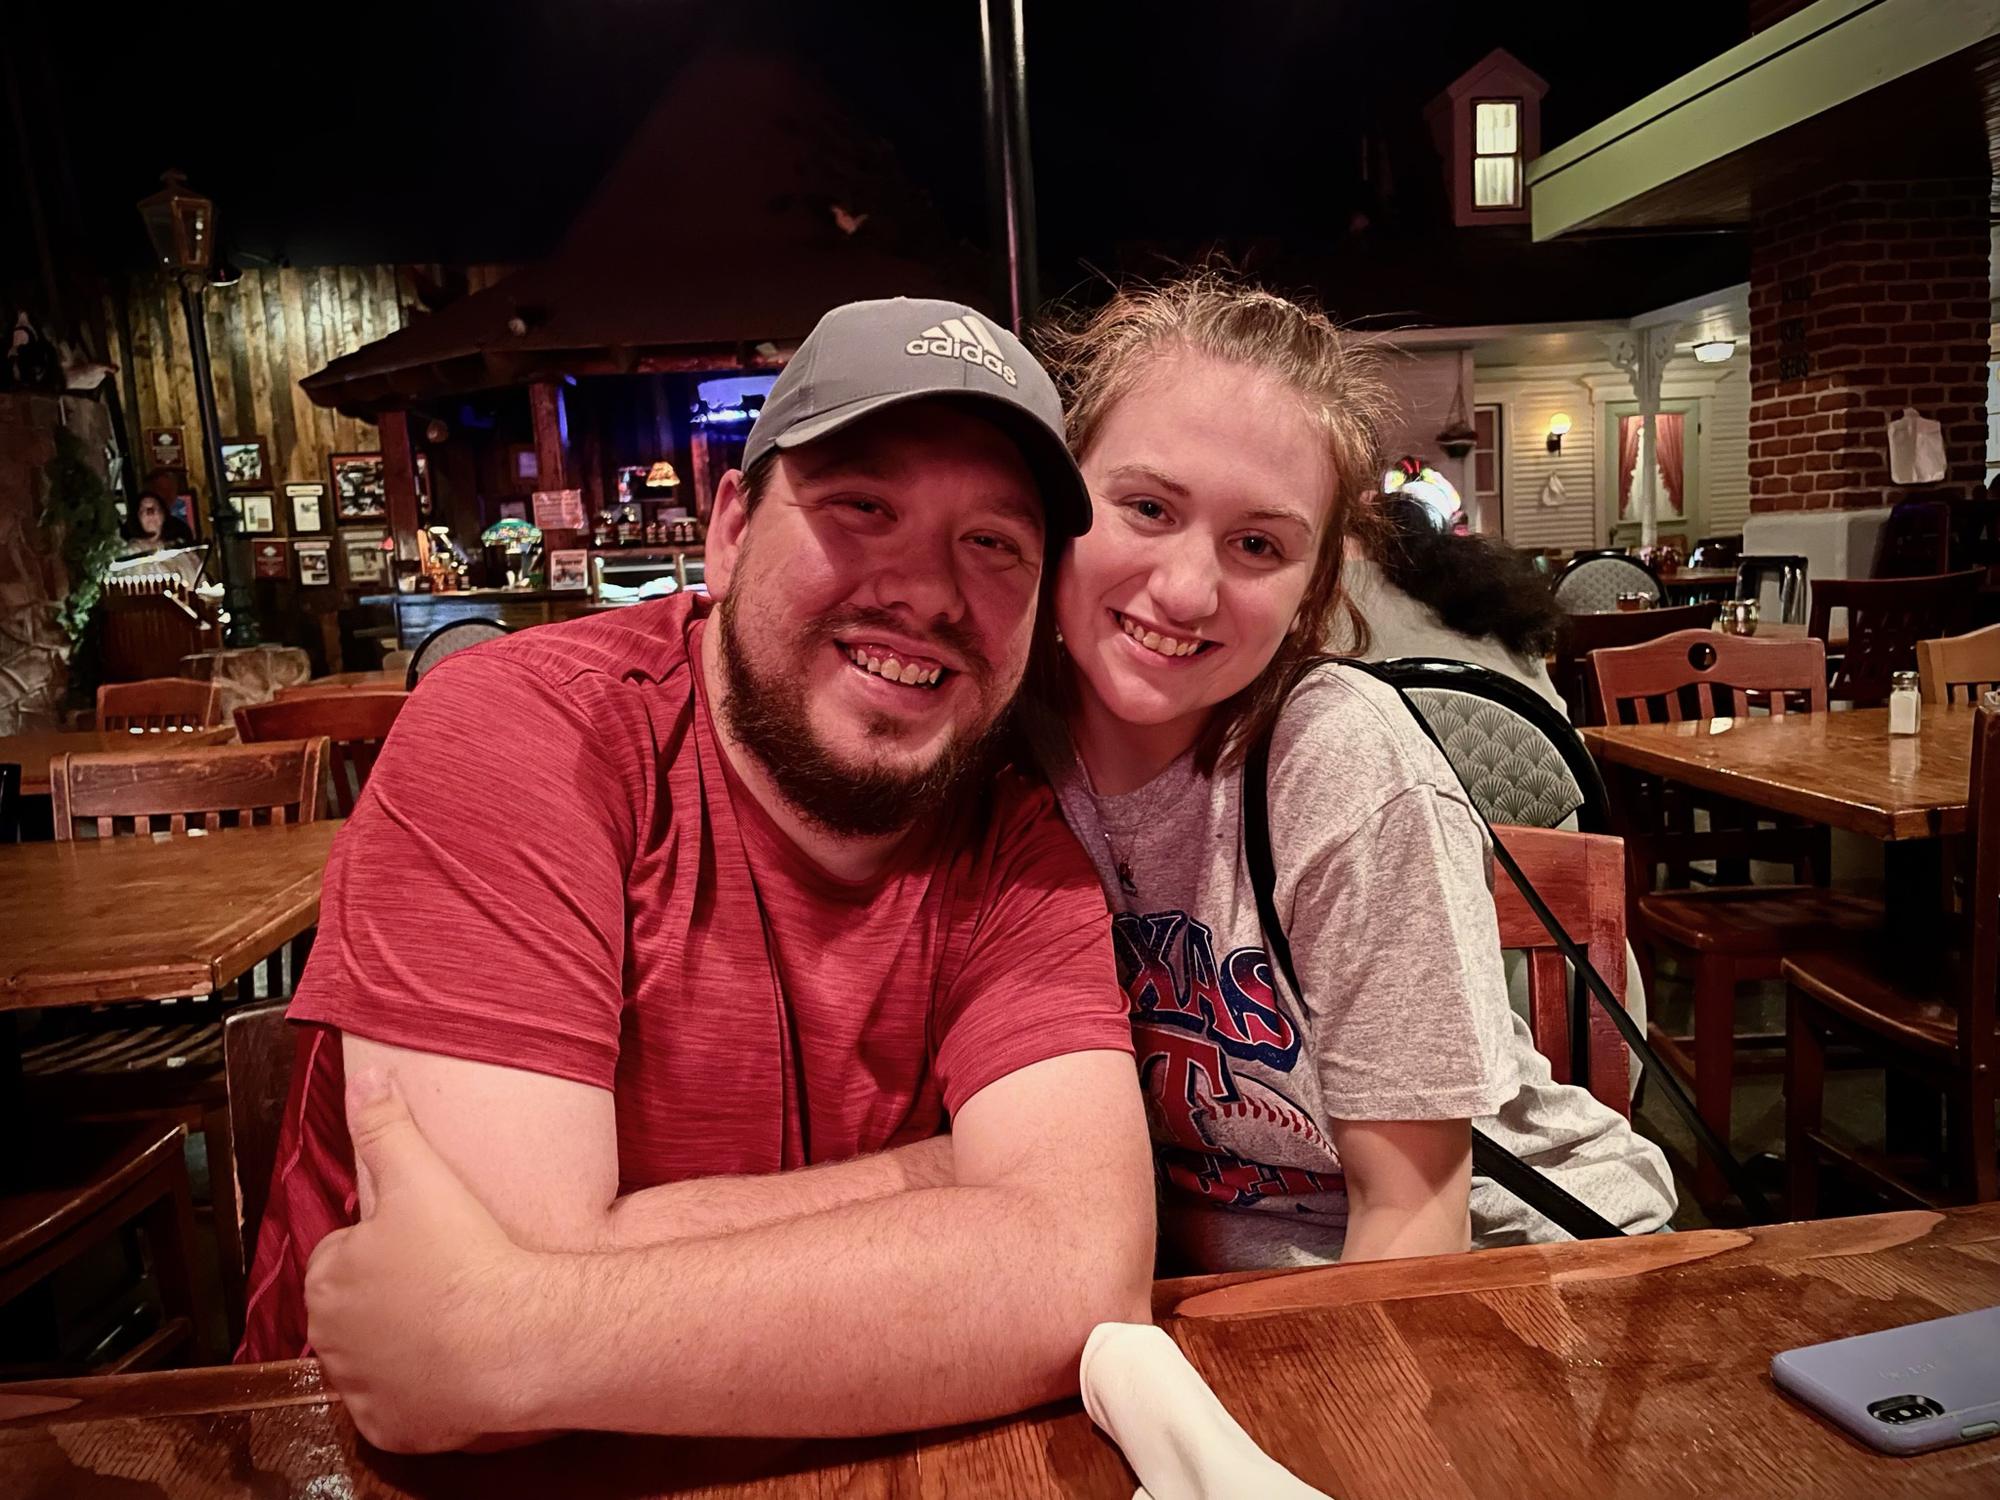 We went and saw the Texas Rangers play in the end ate some pretty amazing food at babes chicken!